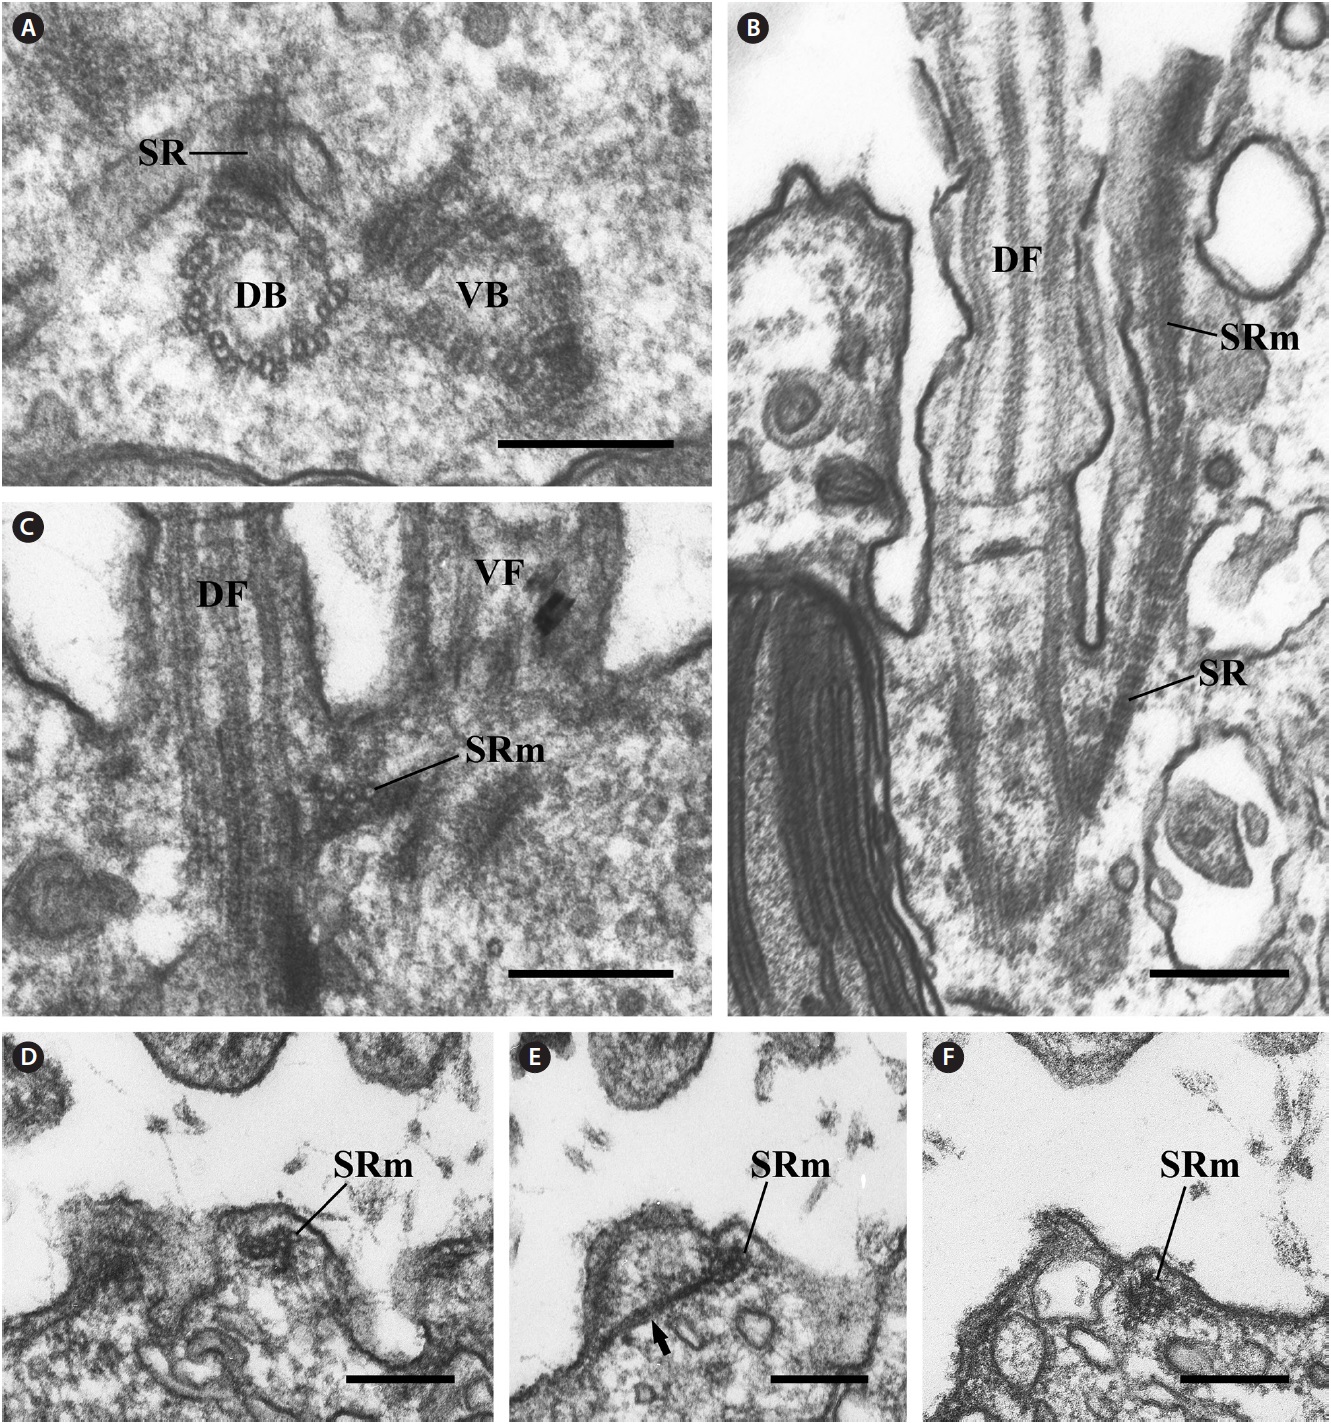 Transmission electron micrographs of the striated fibrous root (SR) and striated fiber-associated microtubular root (SRm). (A) Cross
section of the two basal bodies showing the SR originating at the ventral basal body. (B) Longitudinal section of the ventral flagellum (VF)
showing that that the SR and SRm extended parallel to the dorsal anterior lobe of the cell. (C) Longitudinal section of the two basal bodies
showing that the SRm originated between the two basal bodies and consisted of three microtubules. (D-F) Serial cross sections of the SRm
showing that the number of microtubules gradually increased to five and that the SRm consisted of four microtubules associated with a wing-like
structure. DB, dorsal basal body; DF, dorsal flagellum; VB, ventral basal body. Scale bars represent: A-F, 0.2 μm.